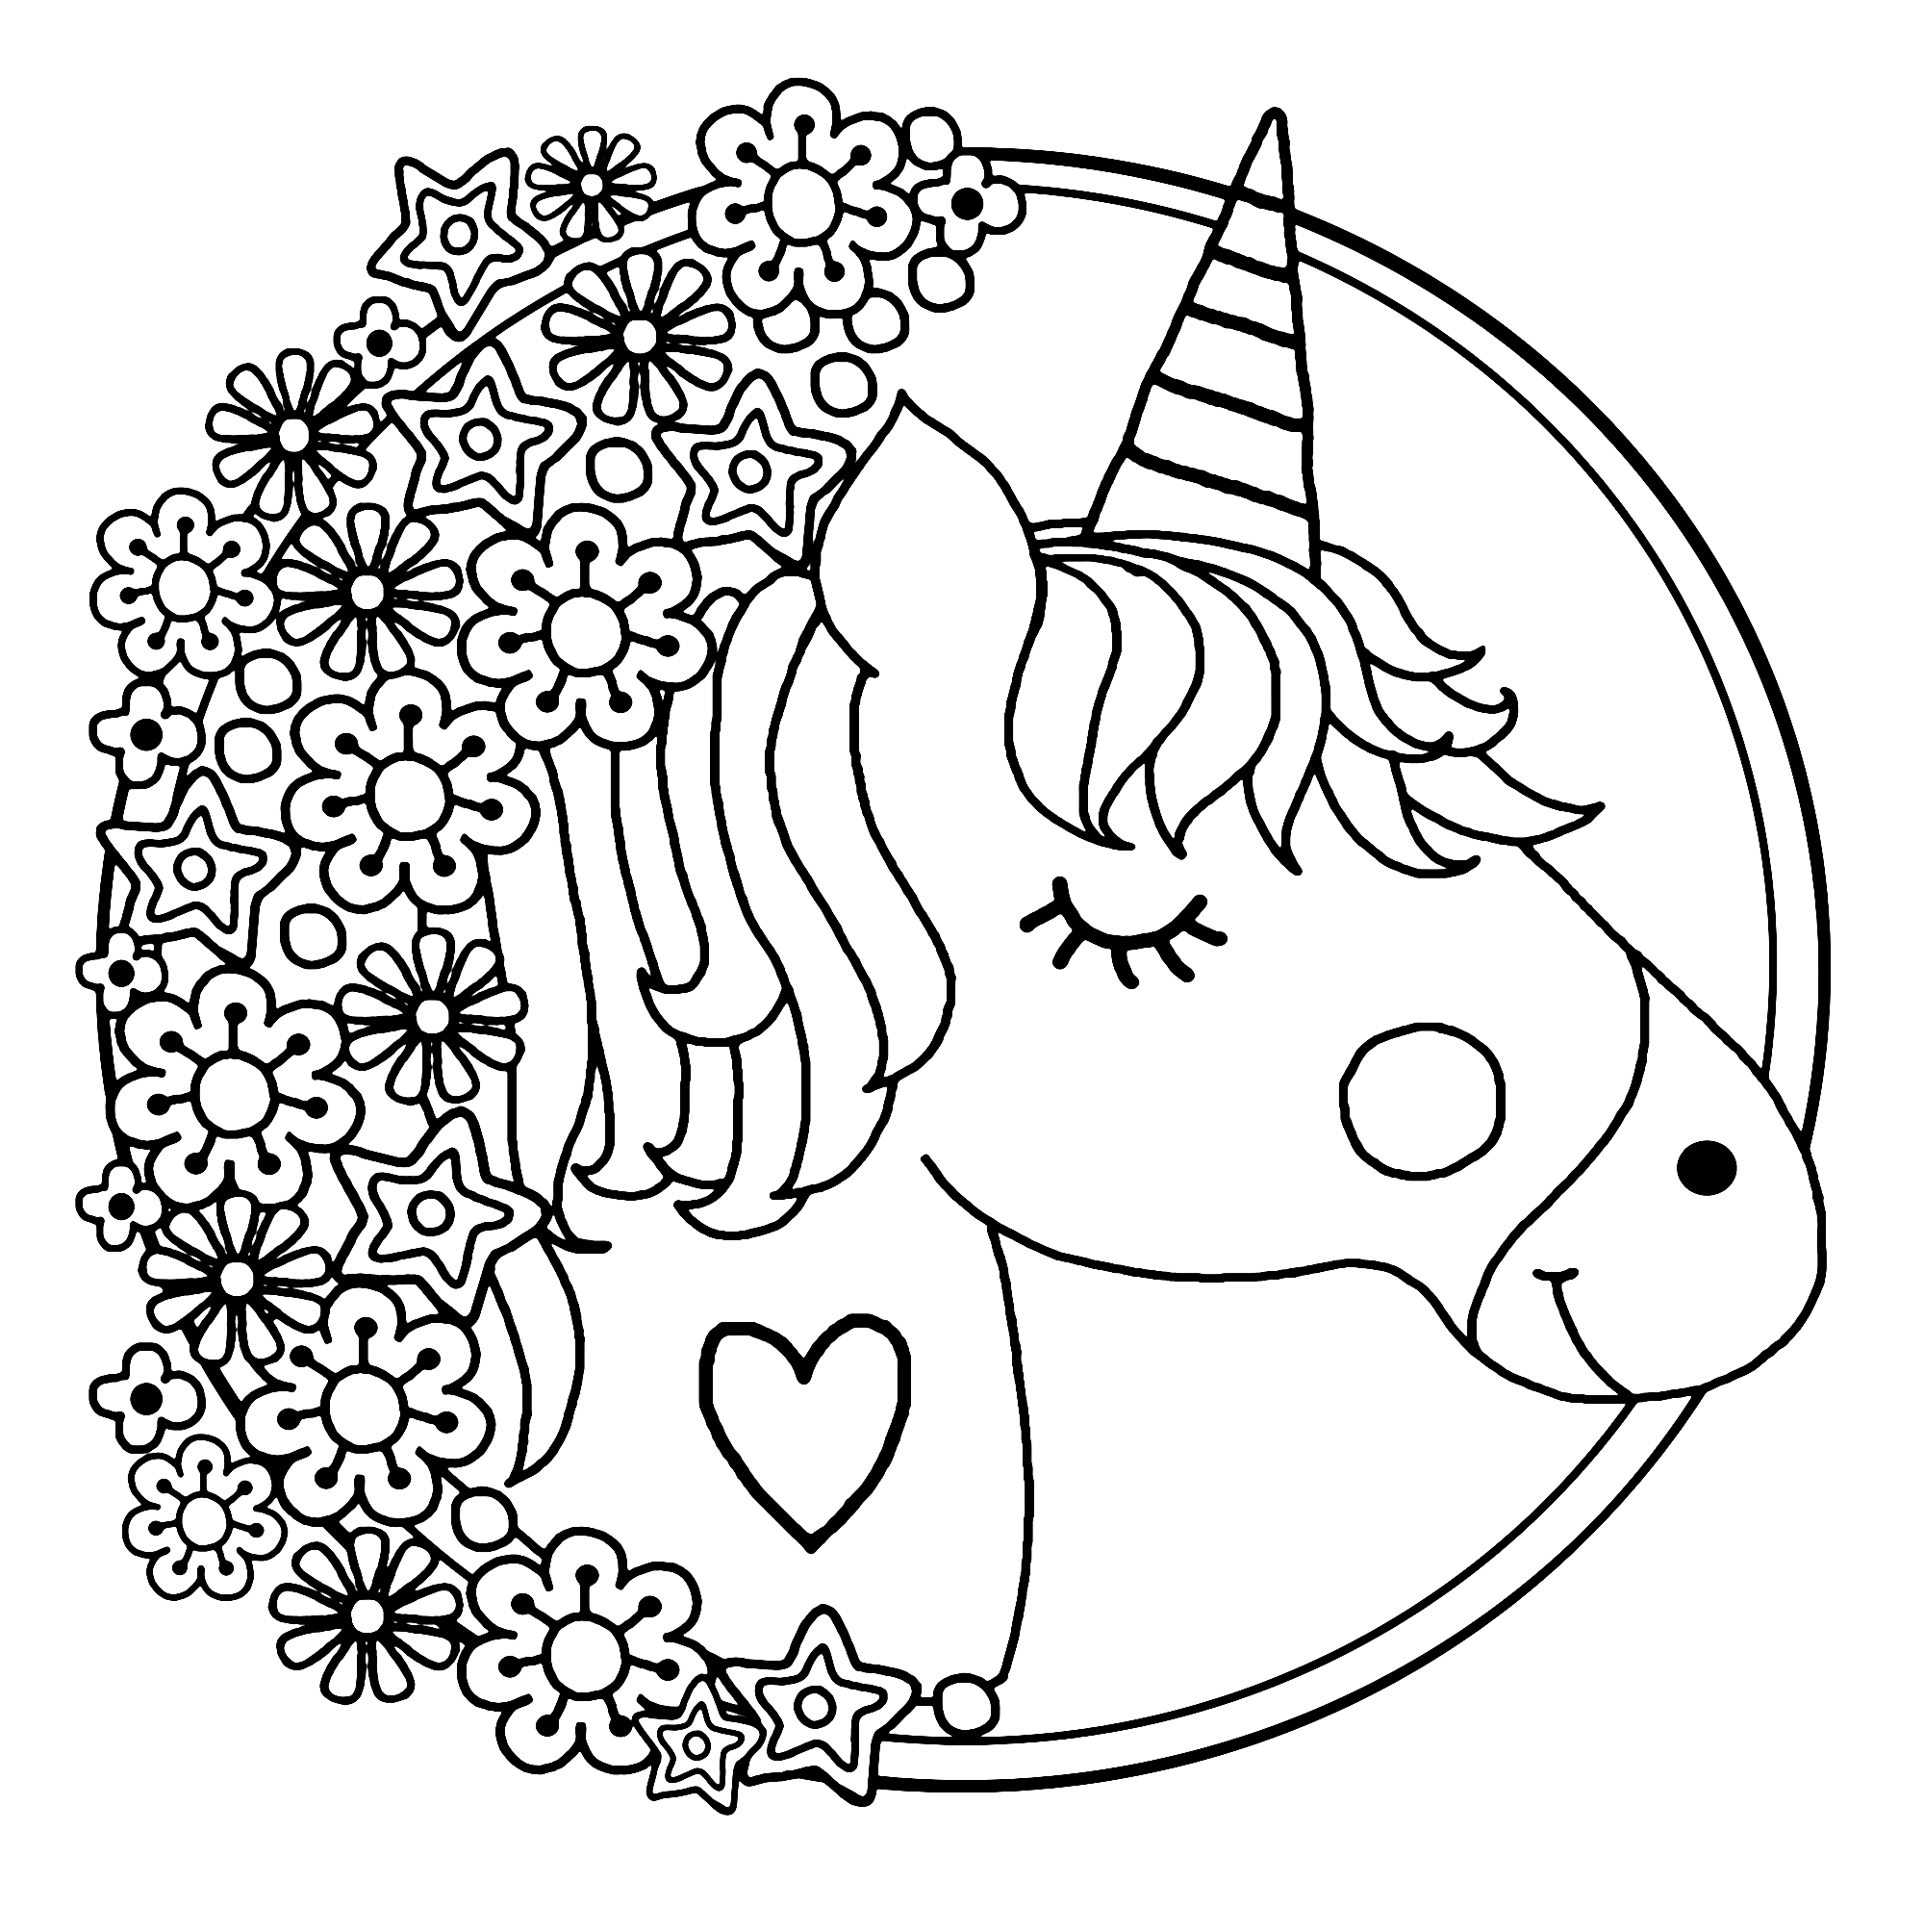 Adorable Unicorn Coloring Page for Adults